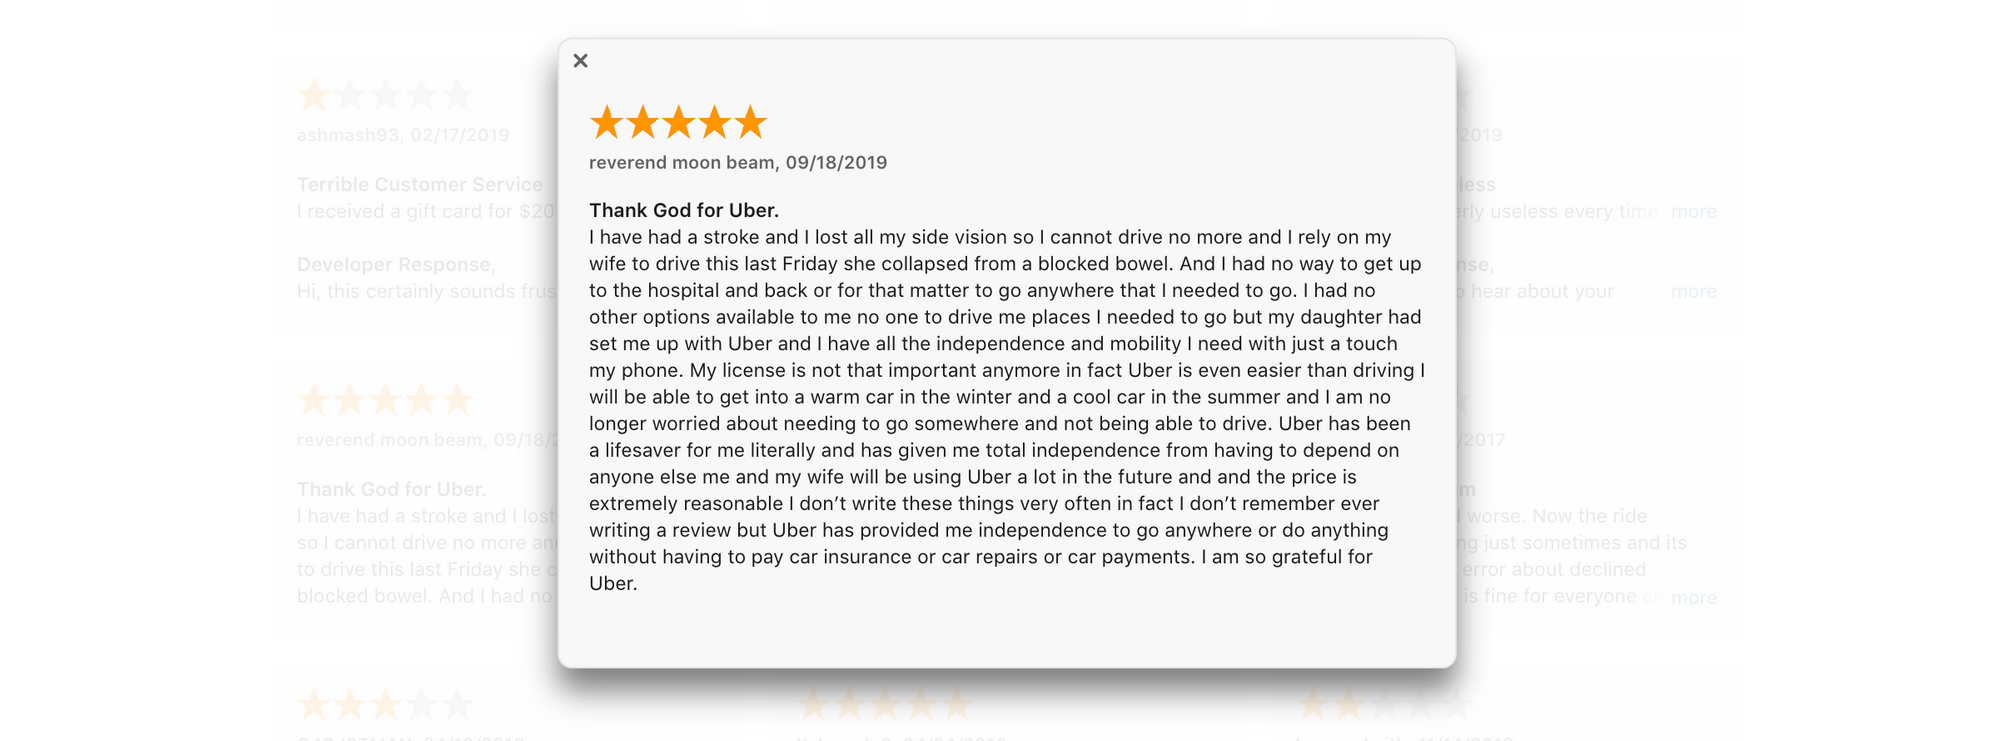 Good reviews on the App Store can make users more likely to install the app